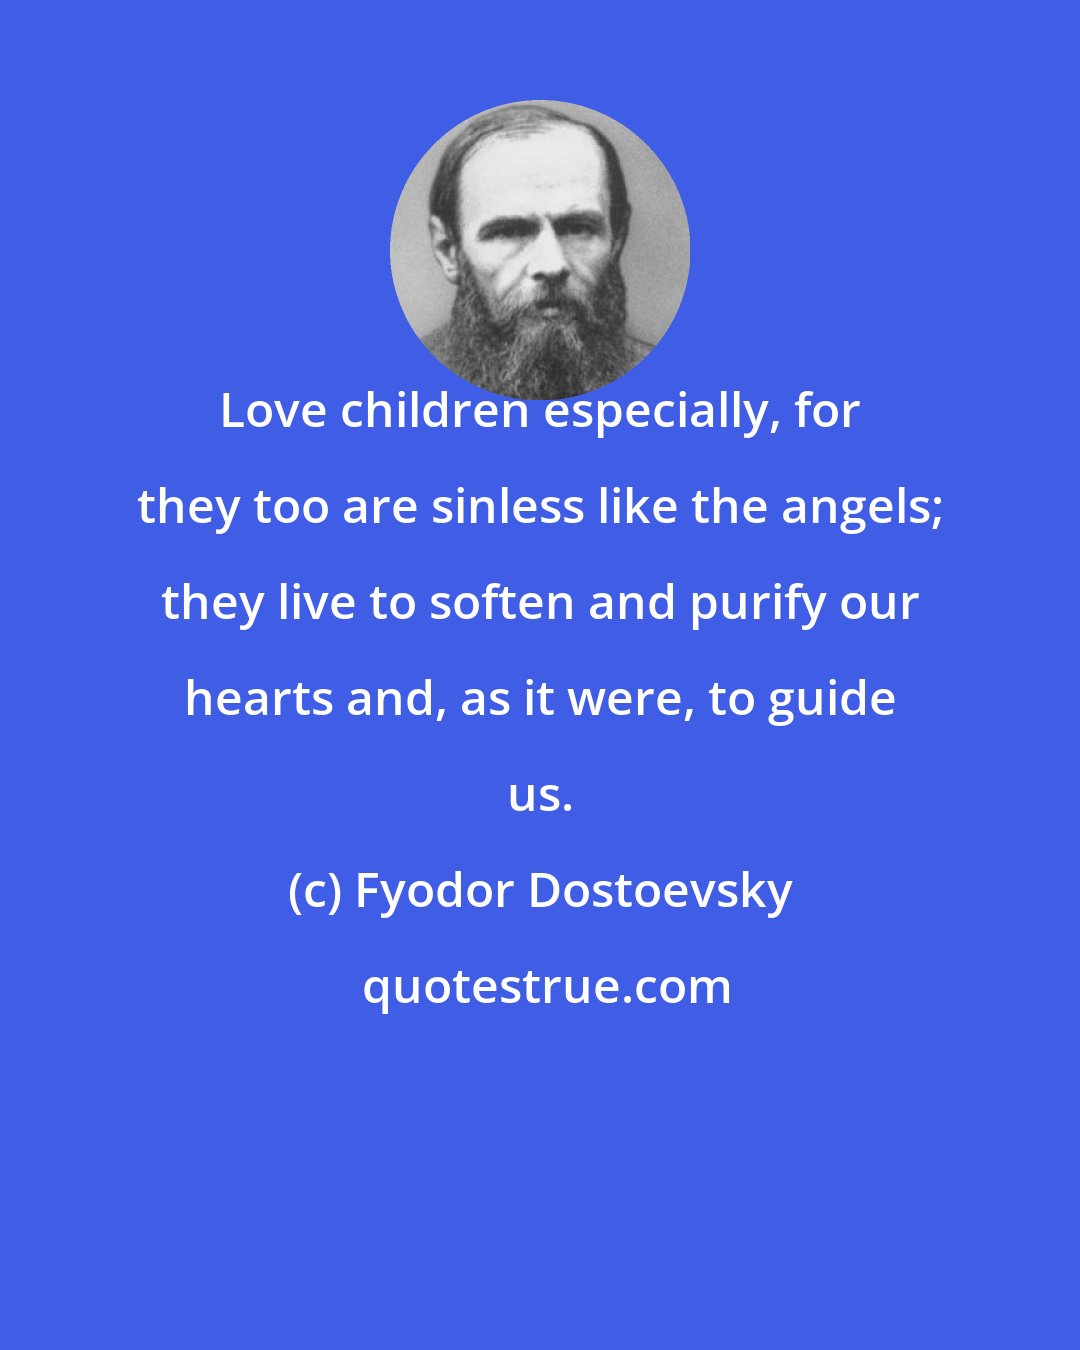 Fyodor Dostoevsky: Love children especially, for they too are sinless like the angels; they live to soften and purify our hearts and, as it were, to guide us.